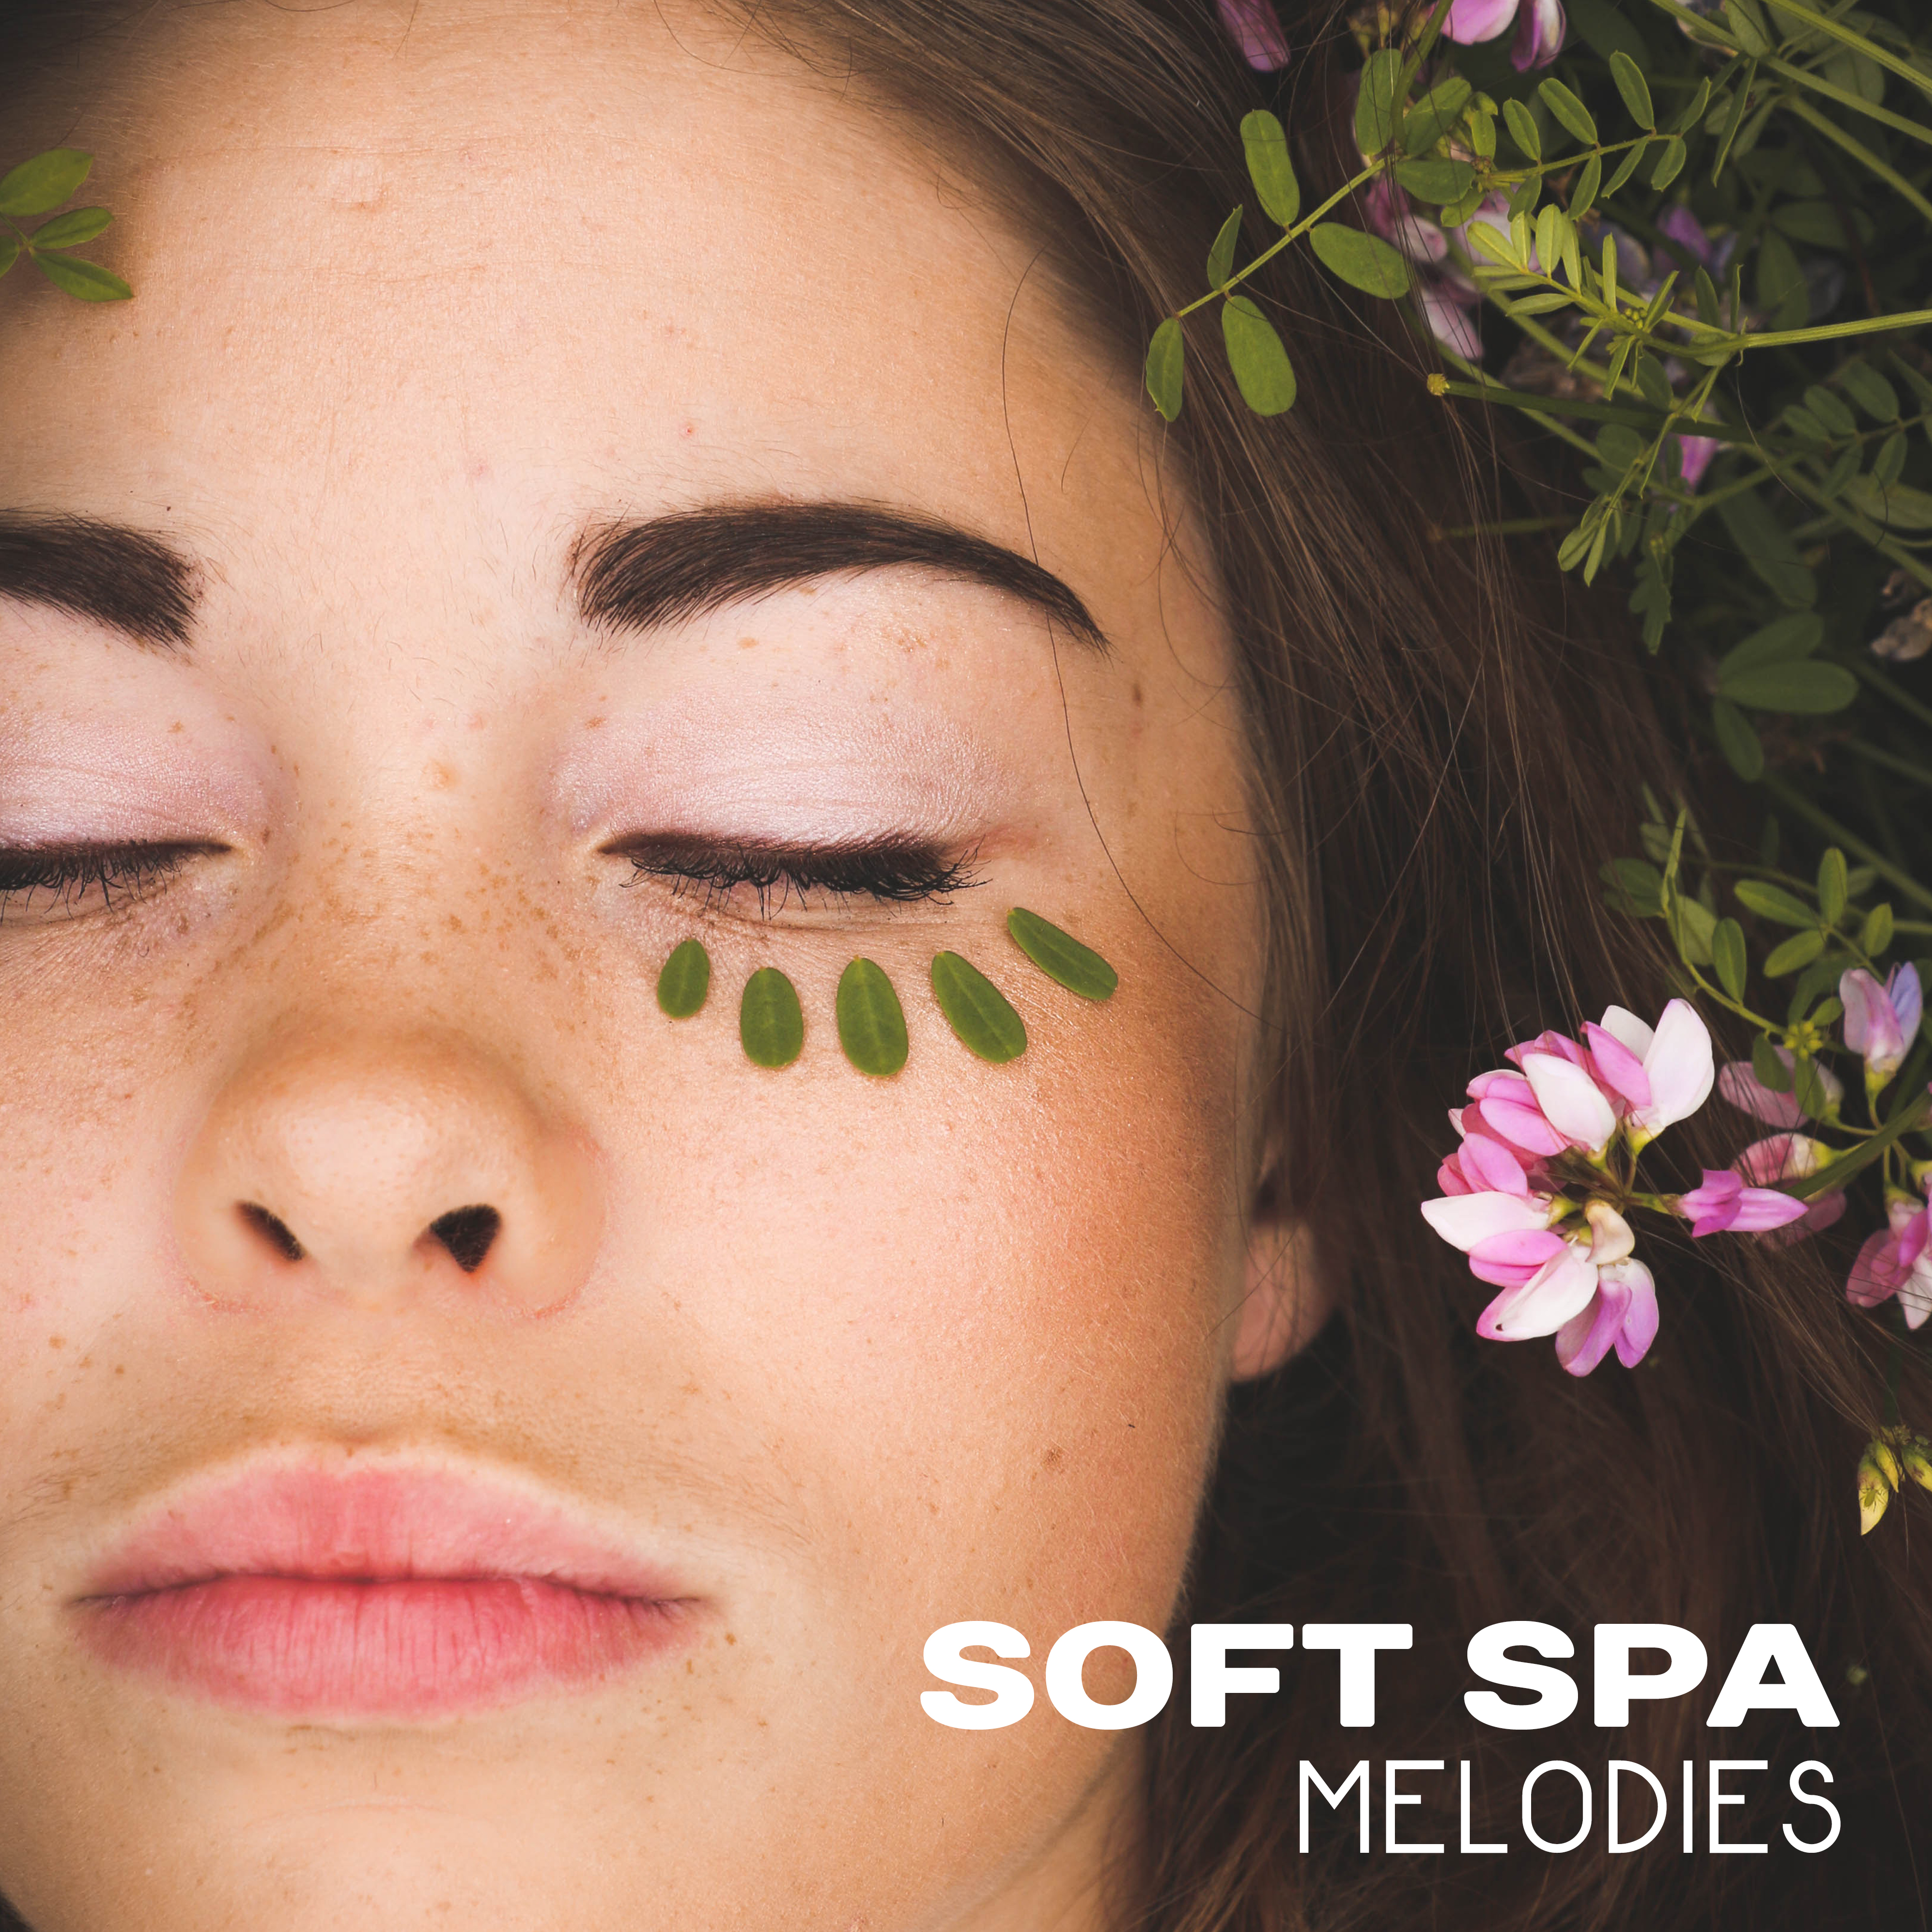 Soft Spa Melodies